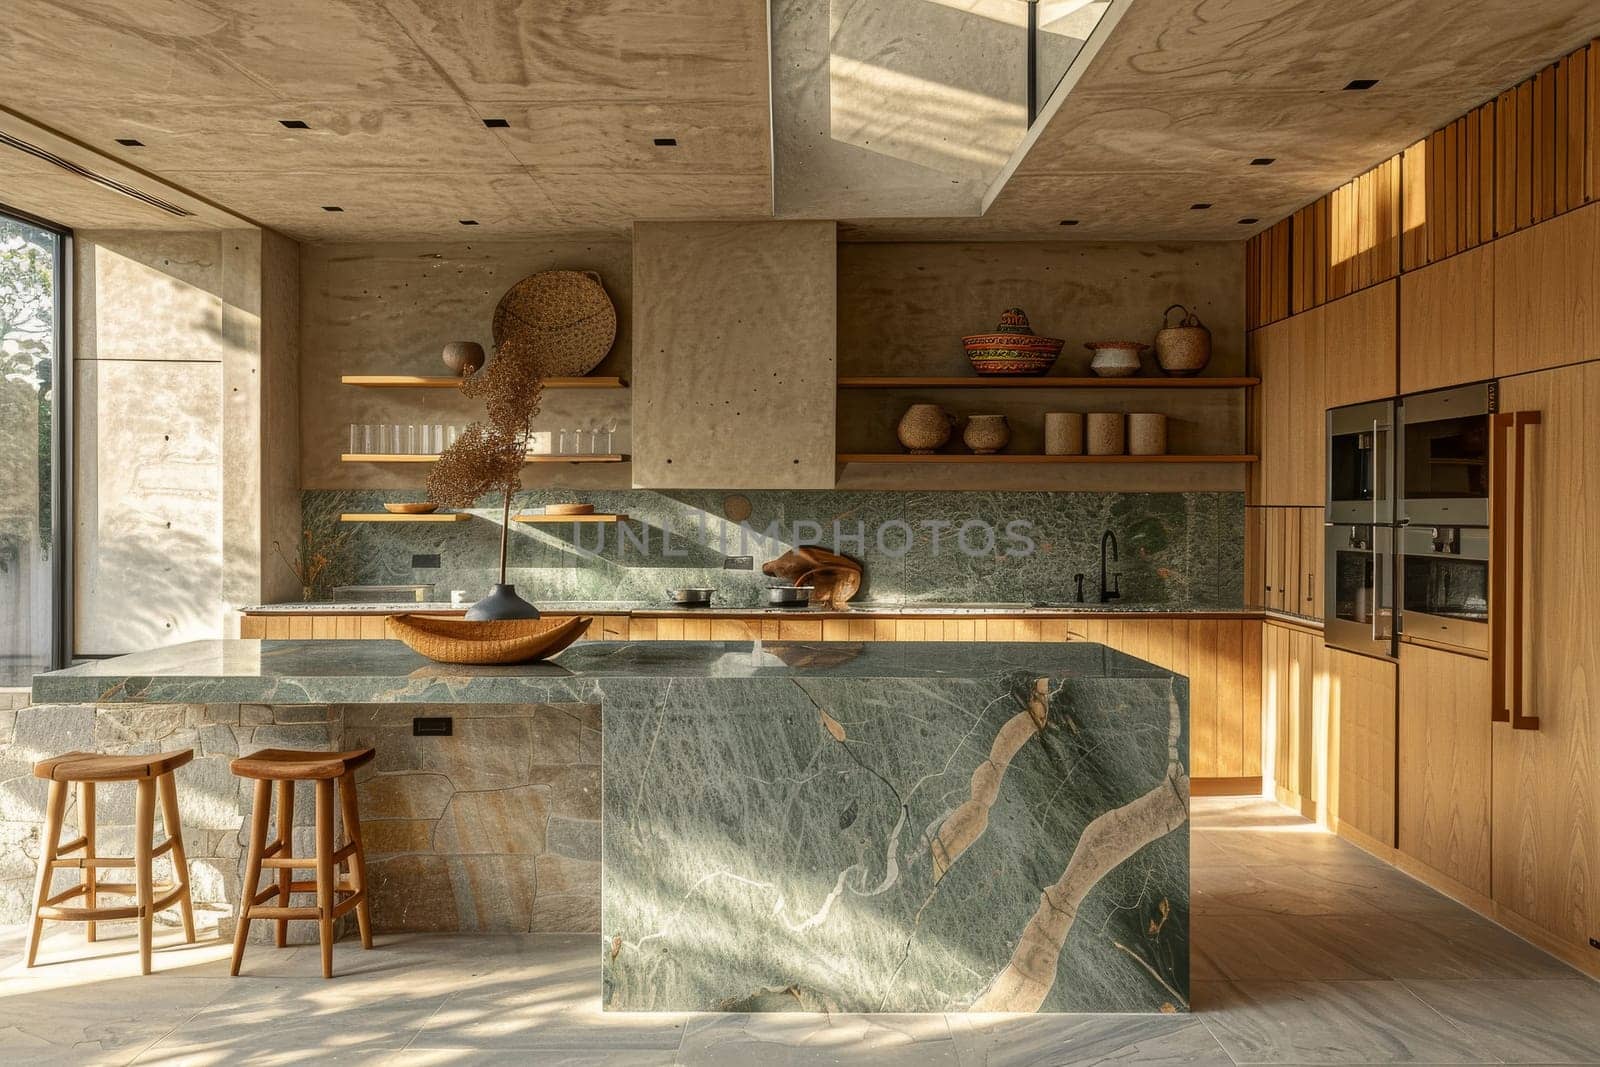 A kitchen with a marble countertop and wooden cabinets. The countertop is surrounded by two stools and a bowl with a plant on it. The kitchen has a modern and minimalist design